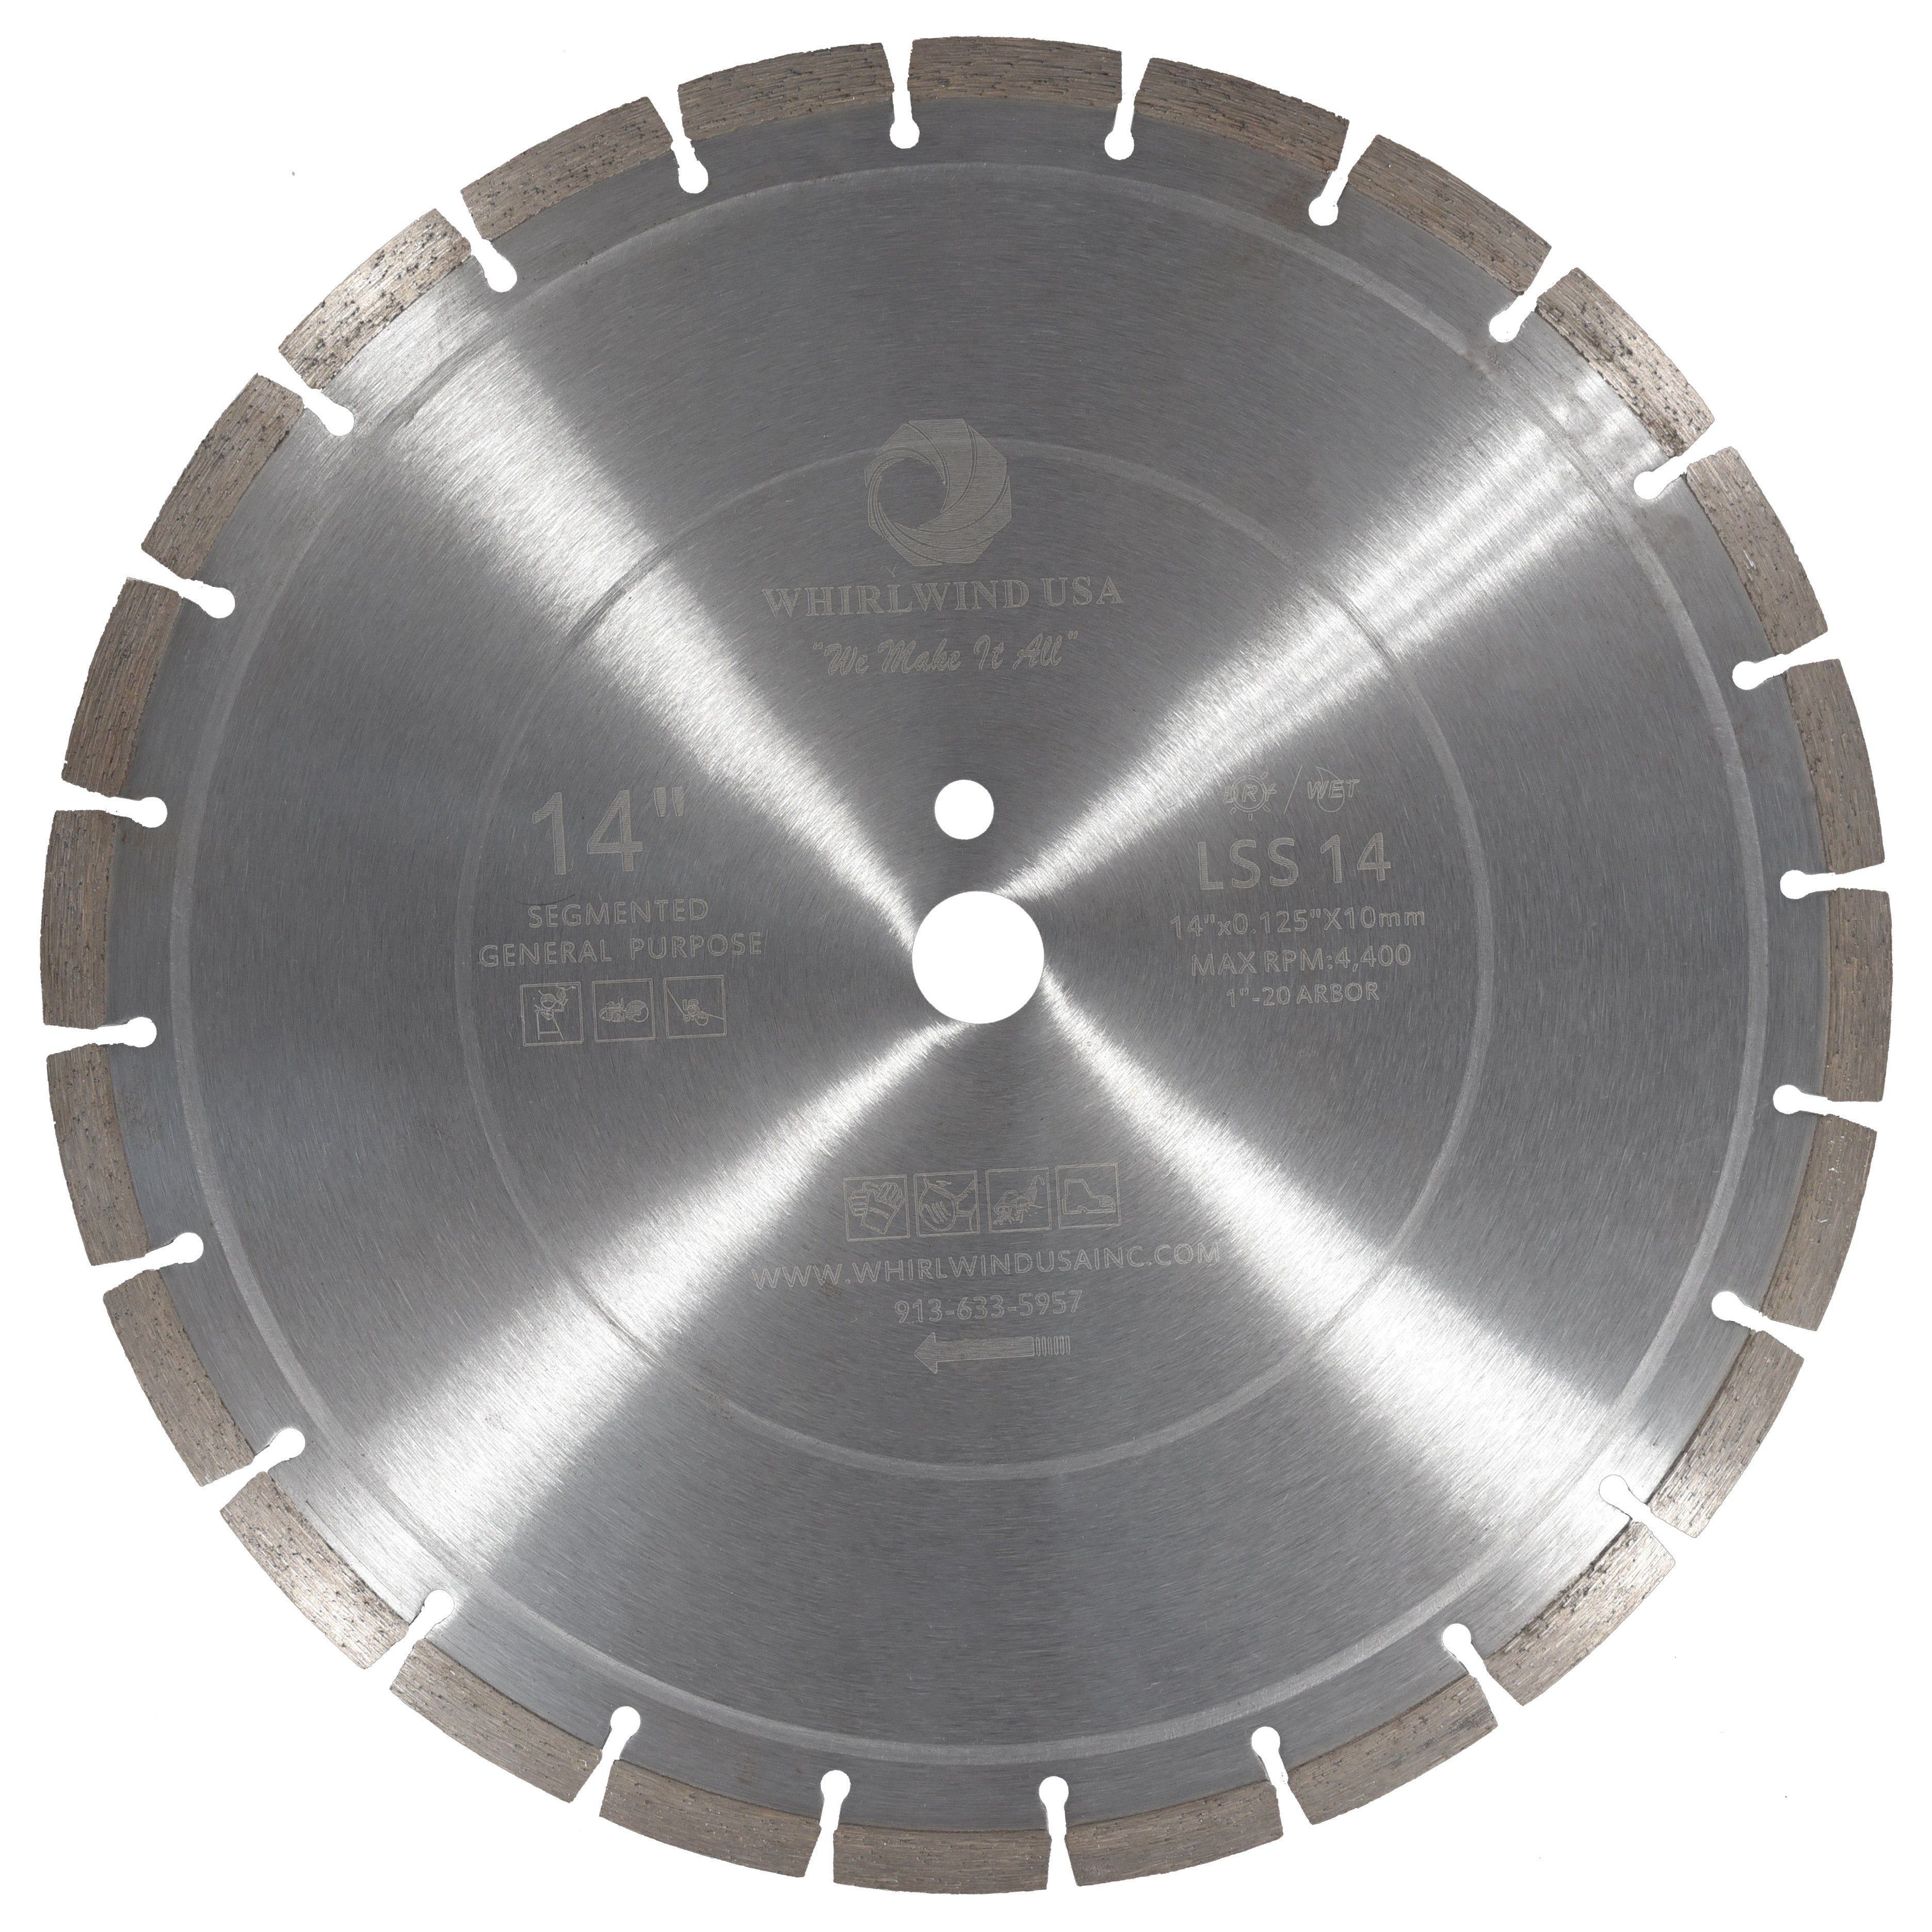 Professional 14" Diamond Saw Blade for Fast Cutting Concrete Paving Stone 